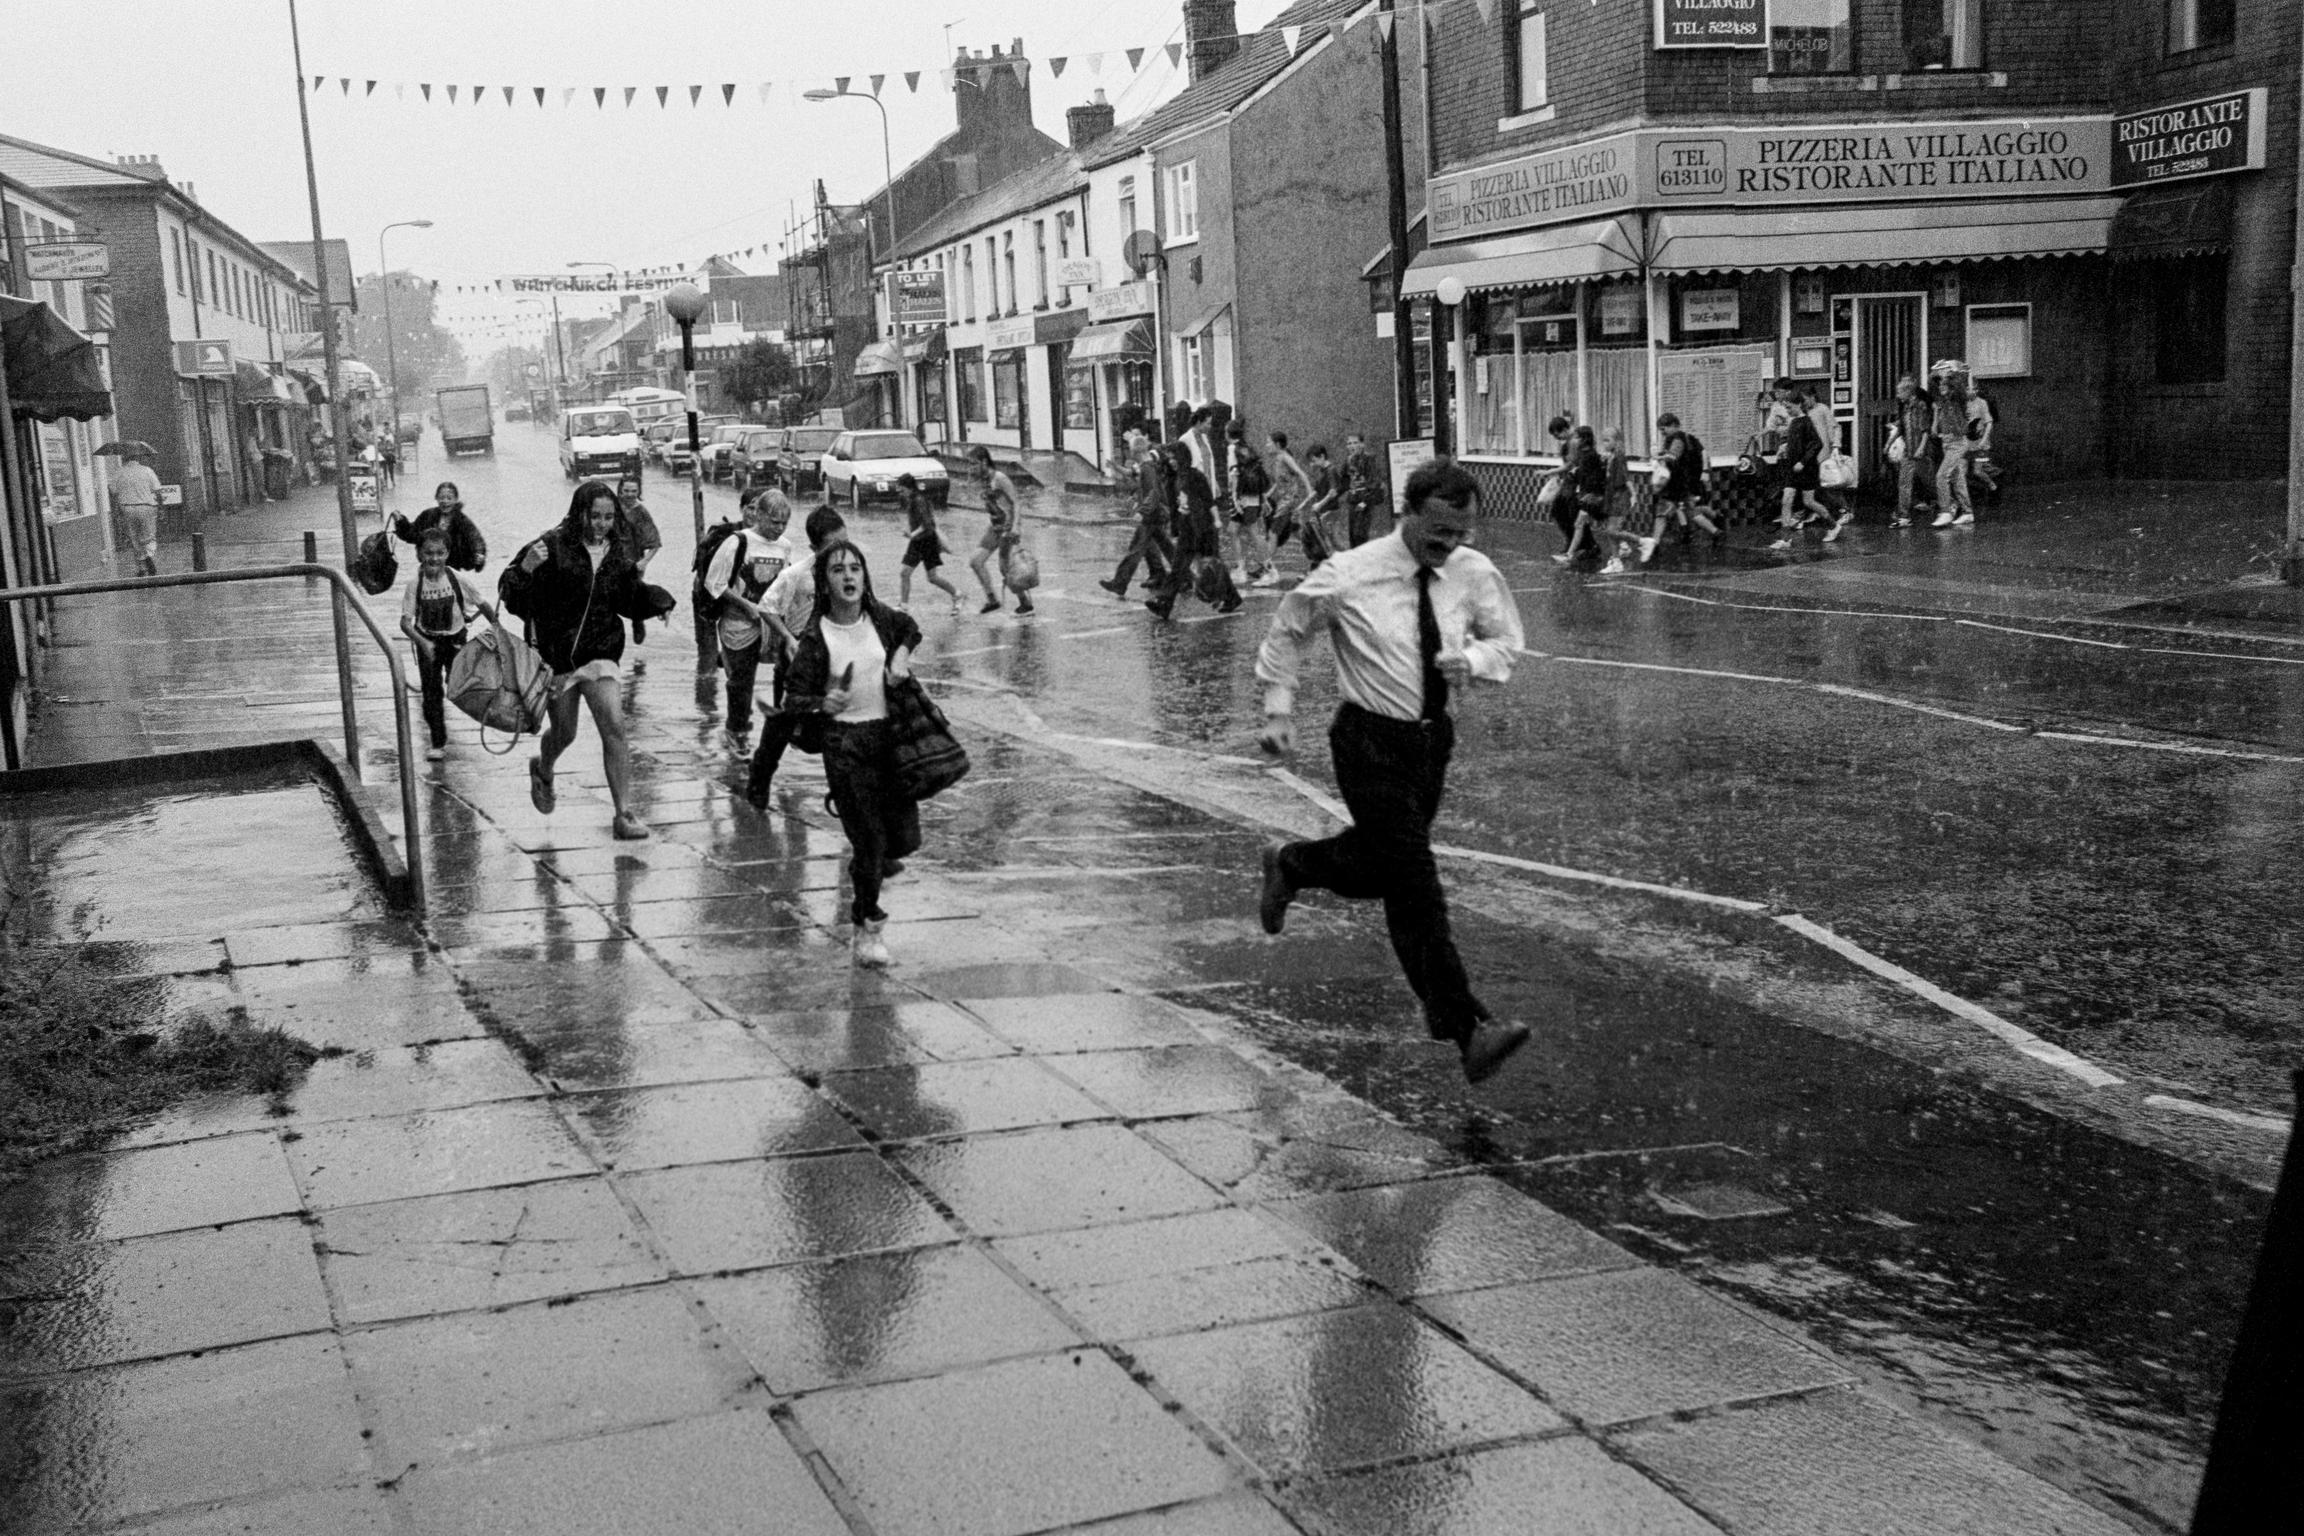 Running from rain in Whitchurch. Cardiff, Wales